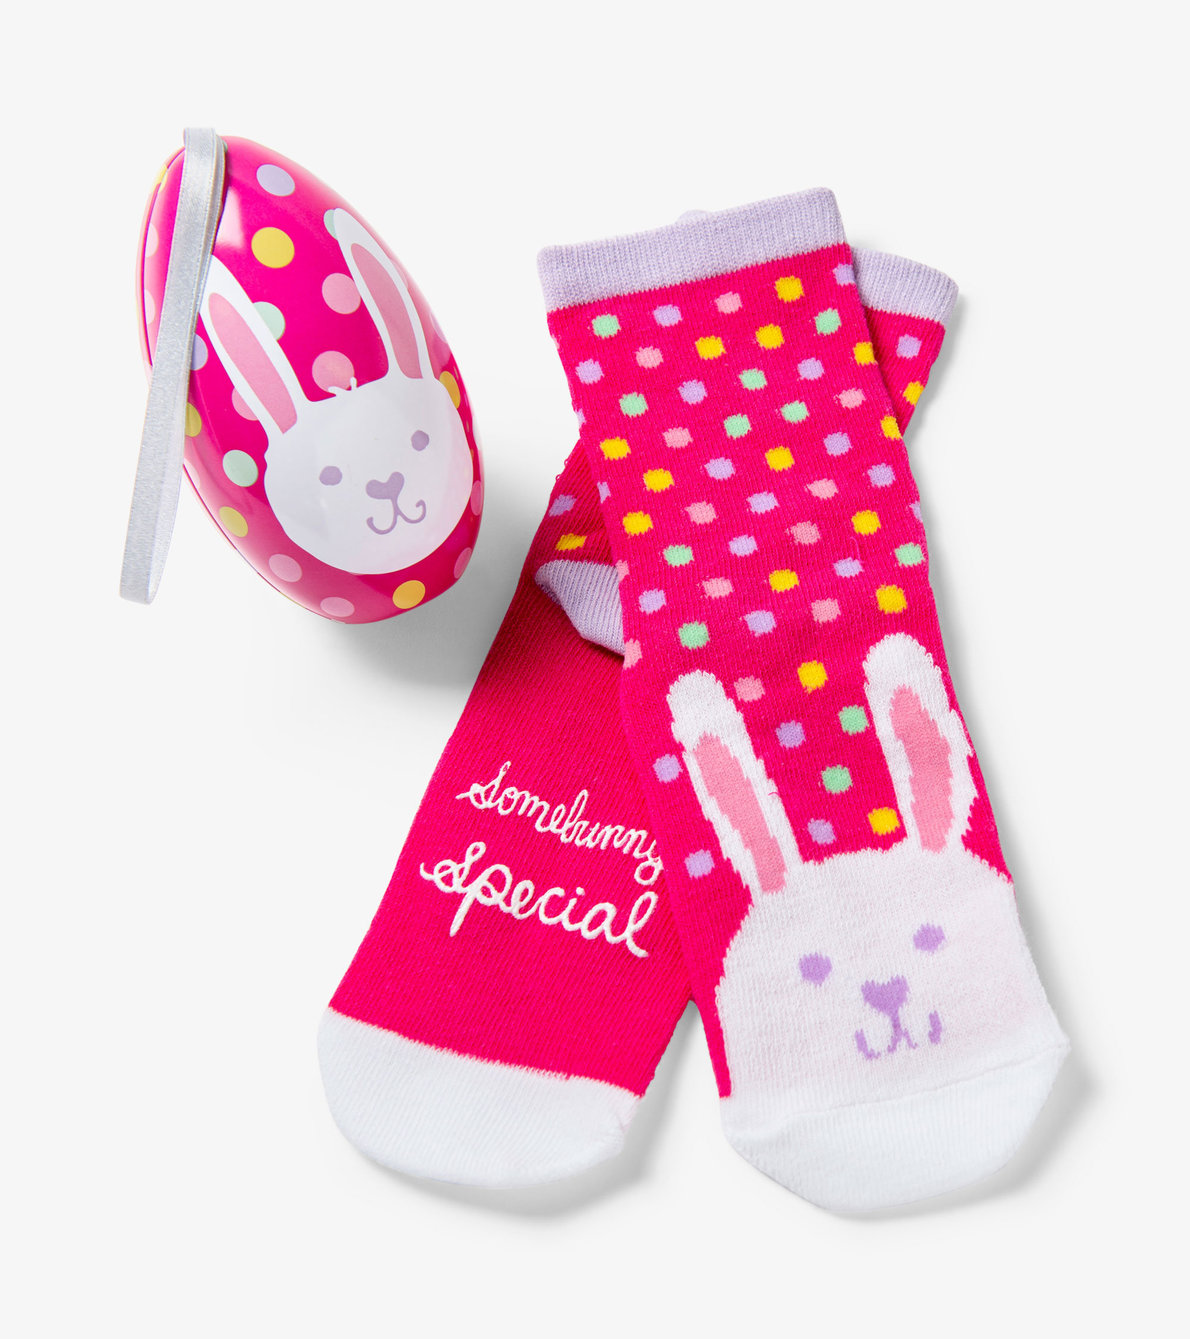 View larger image of Somebunny Special Kids Socks In Eggs